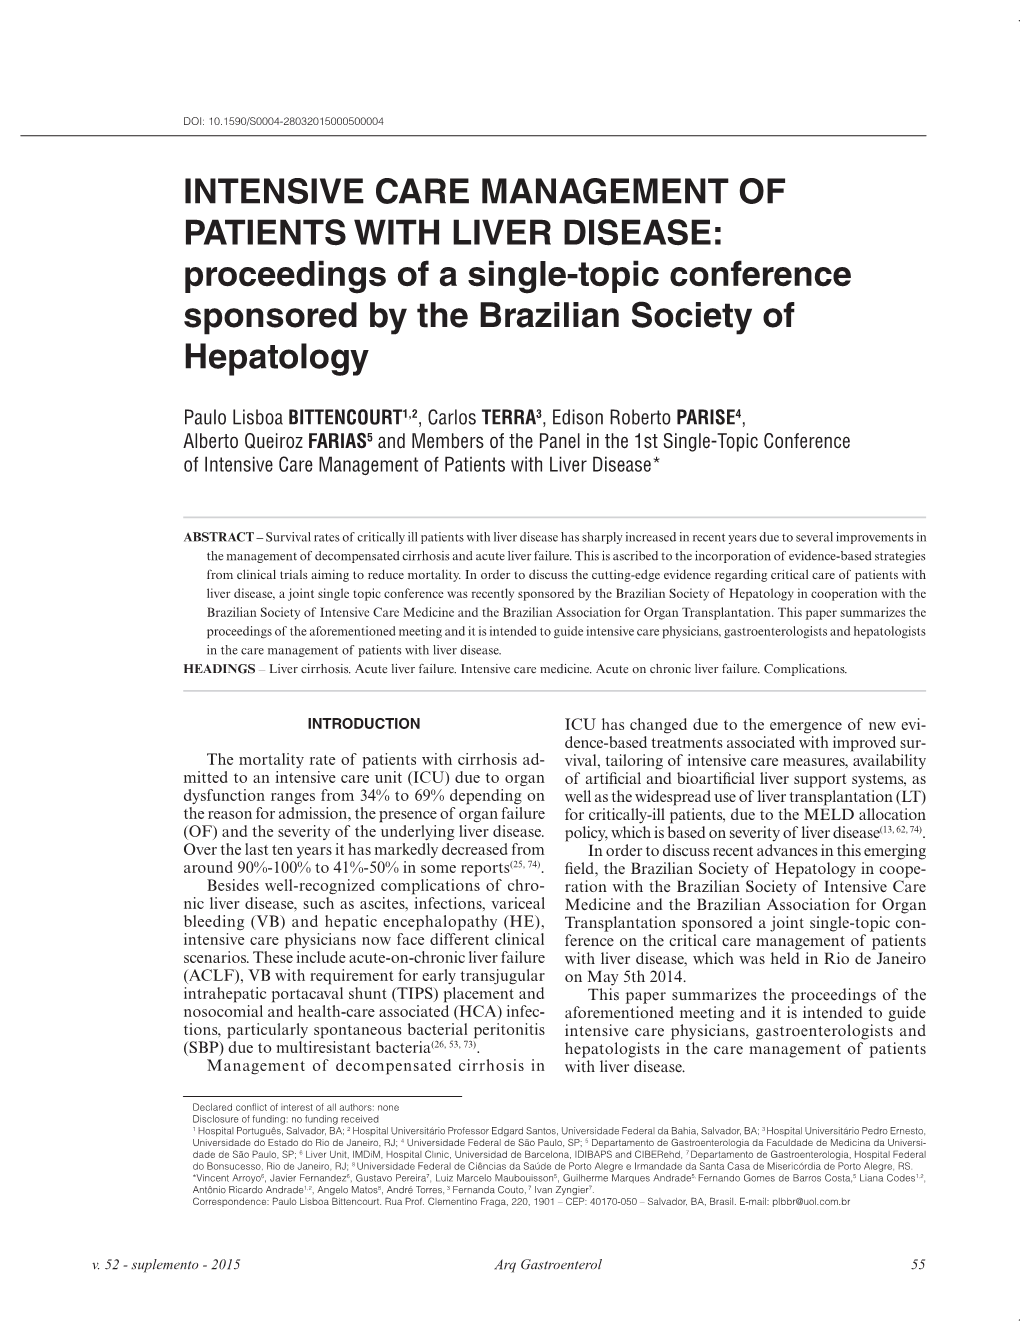 INTENSIVE CARE MANAGEMENT of PATIENTS with LIVER DISEASE: Proceedings of a Single-Topic Conference Sponsored by the Brazilian Society of Hepatology